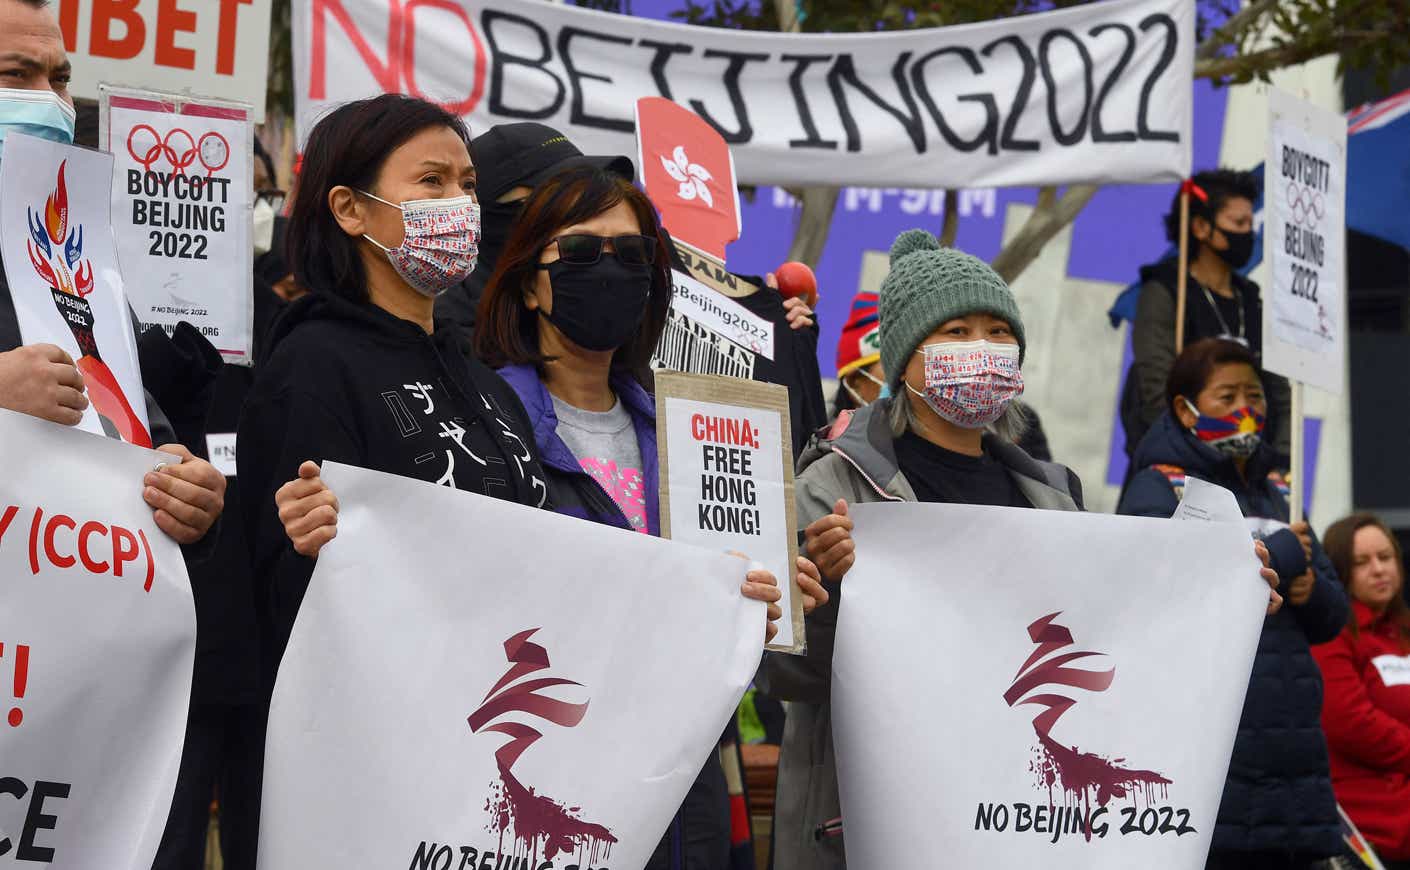 protesters calling for a boycott of the Beijing Olympics